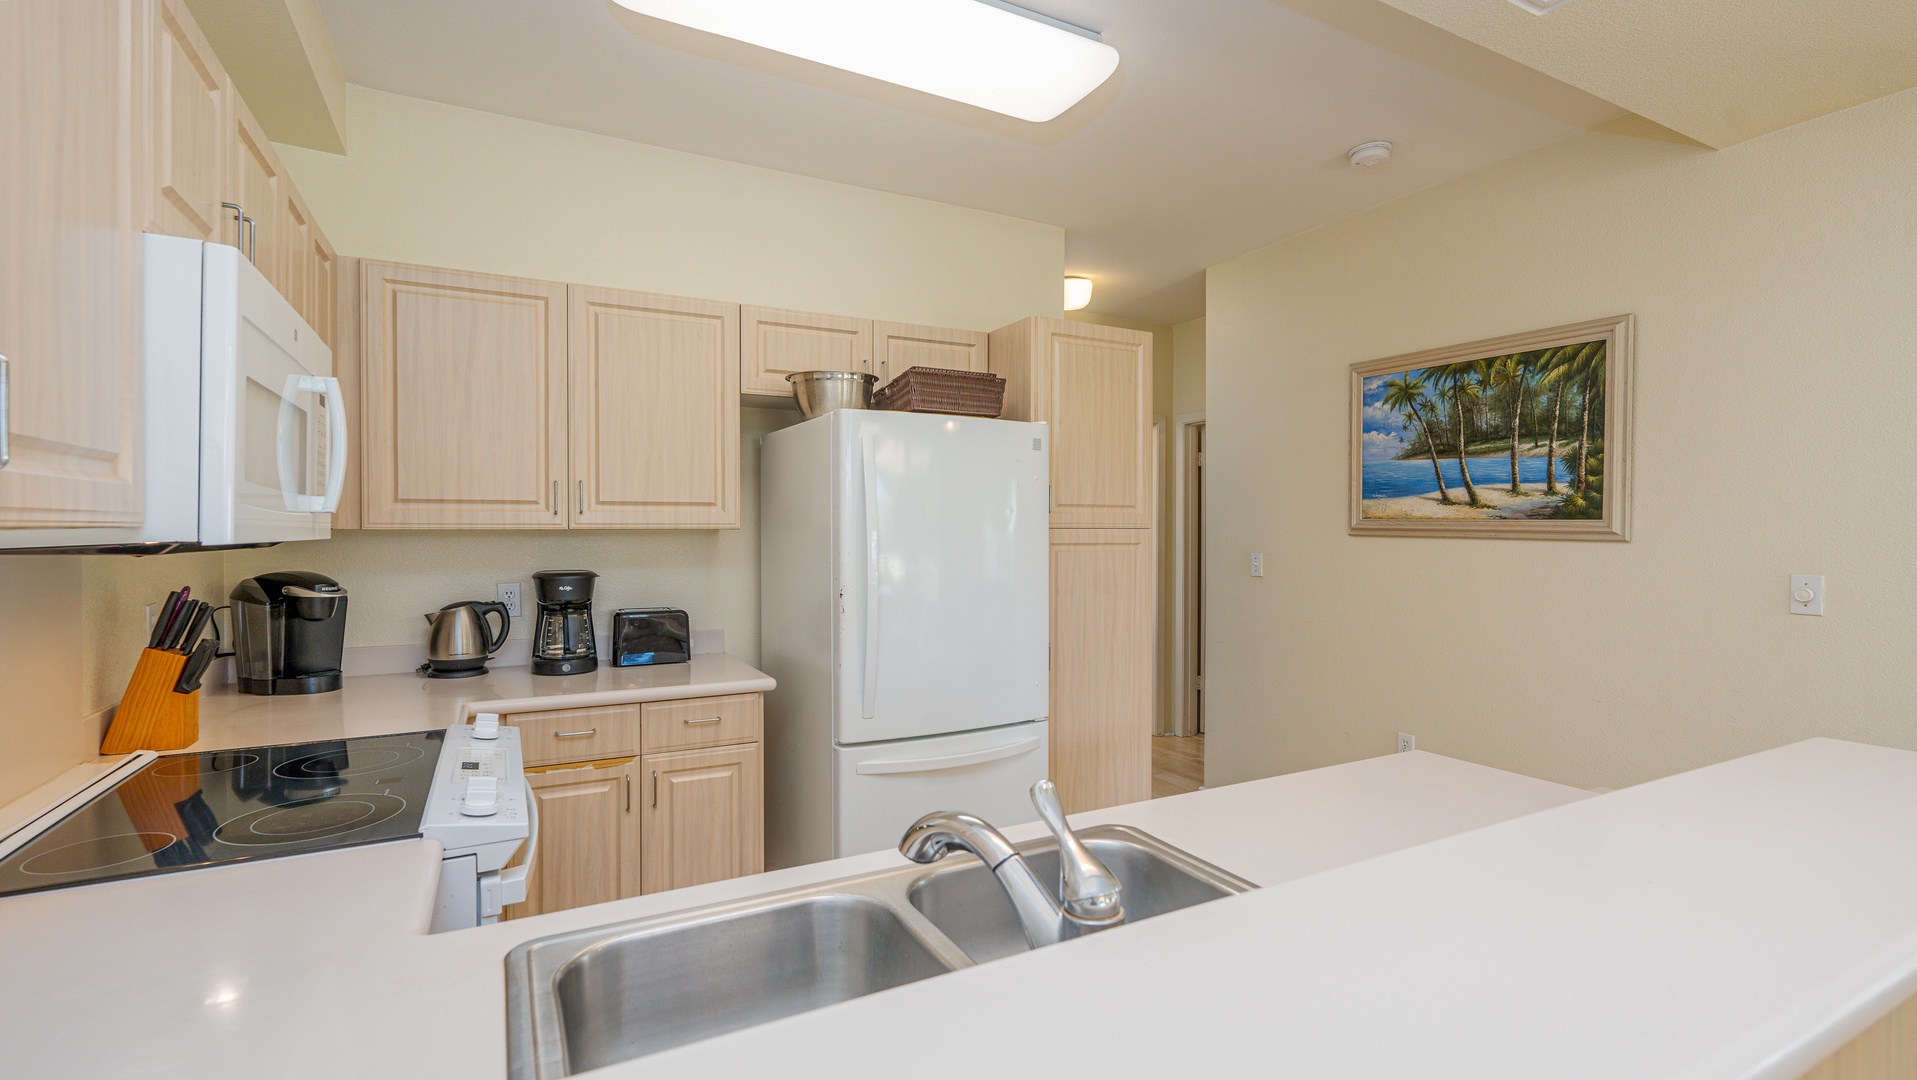 Kapolei Vacation Rentals, Fairways at Ko Olina 18C - Converse with the chef and enjoy your stay.